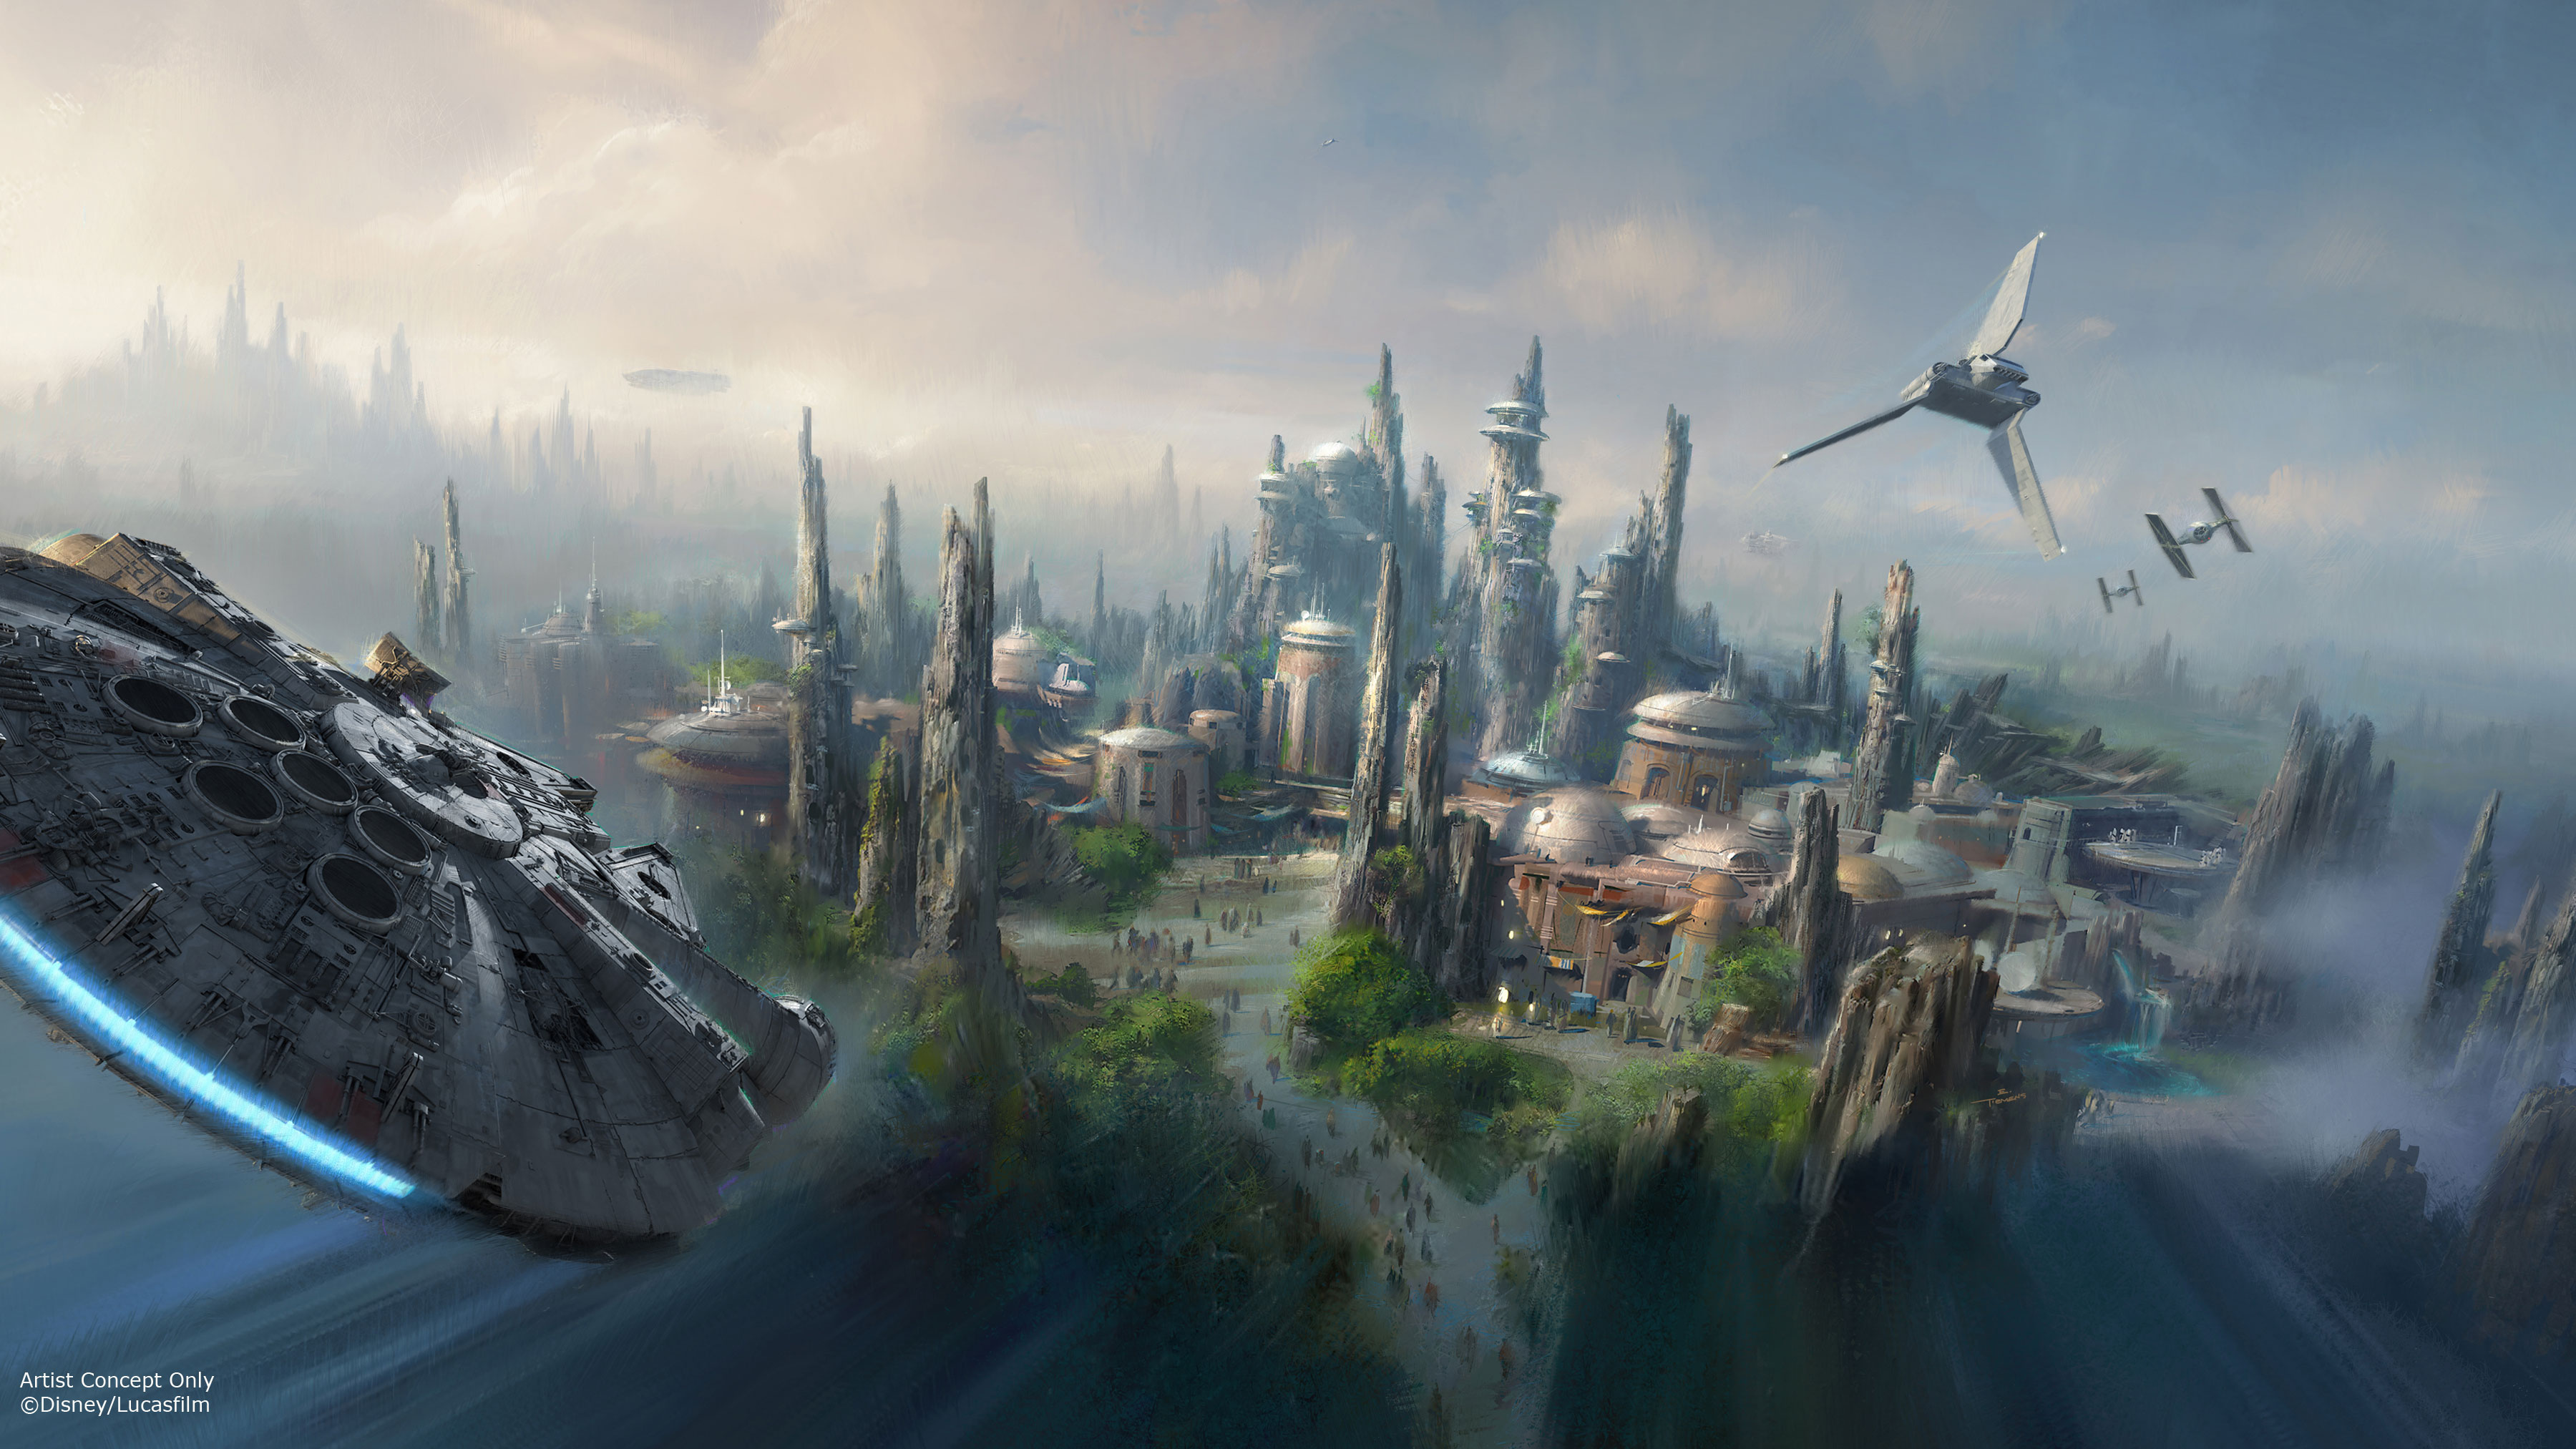 Released at Disney's D23 Expo in Anaheim, CA: concept art for a new, unnamed planet environment that will host all-new Star Wars Land expansions in both Disneyland in Anaheim, CA and Disney's Hollywood Studios in Orlando, FL. These new 14-acre expansions will feature two new thrilling Star Wars attractions based on the new films including THE FORCE AWAKENS opening in theaters December 18, 2015. ©2015 Disney Enterprises, Inc./Lucasfilm Ltd. All Rights Reserved. For editorial news use only.